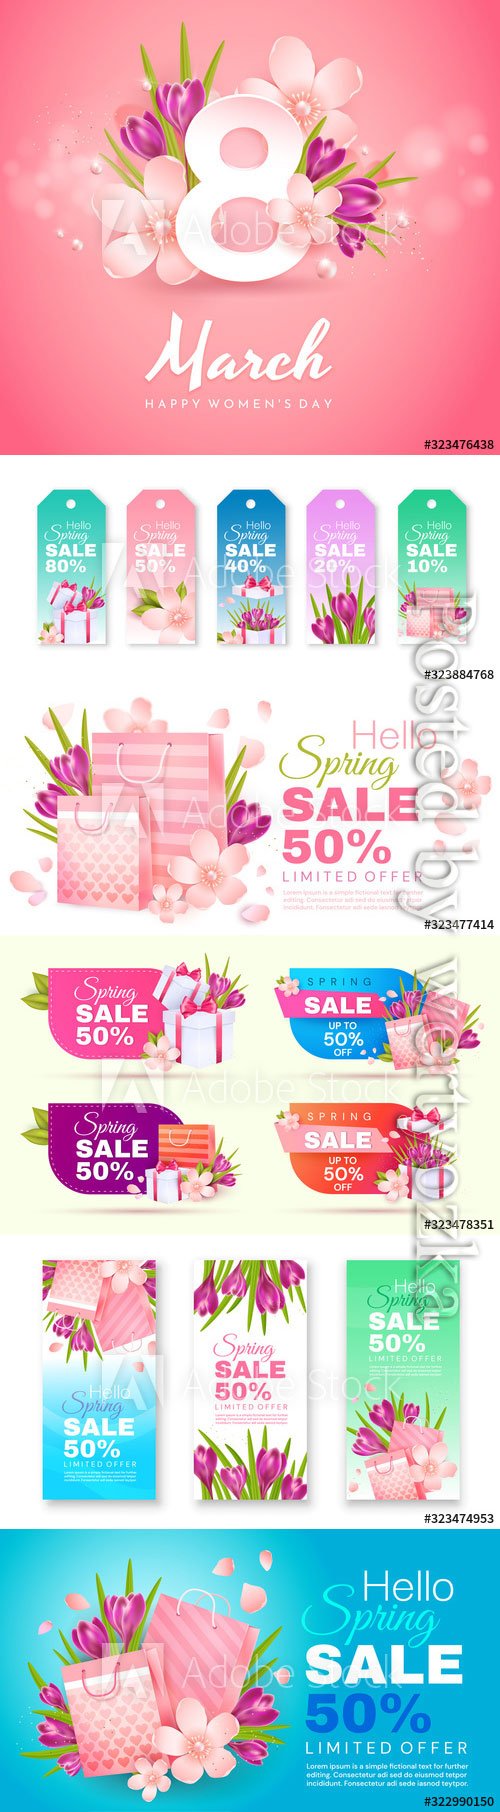 Greeting card for Women's Day, spring sale banners